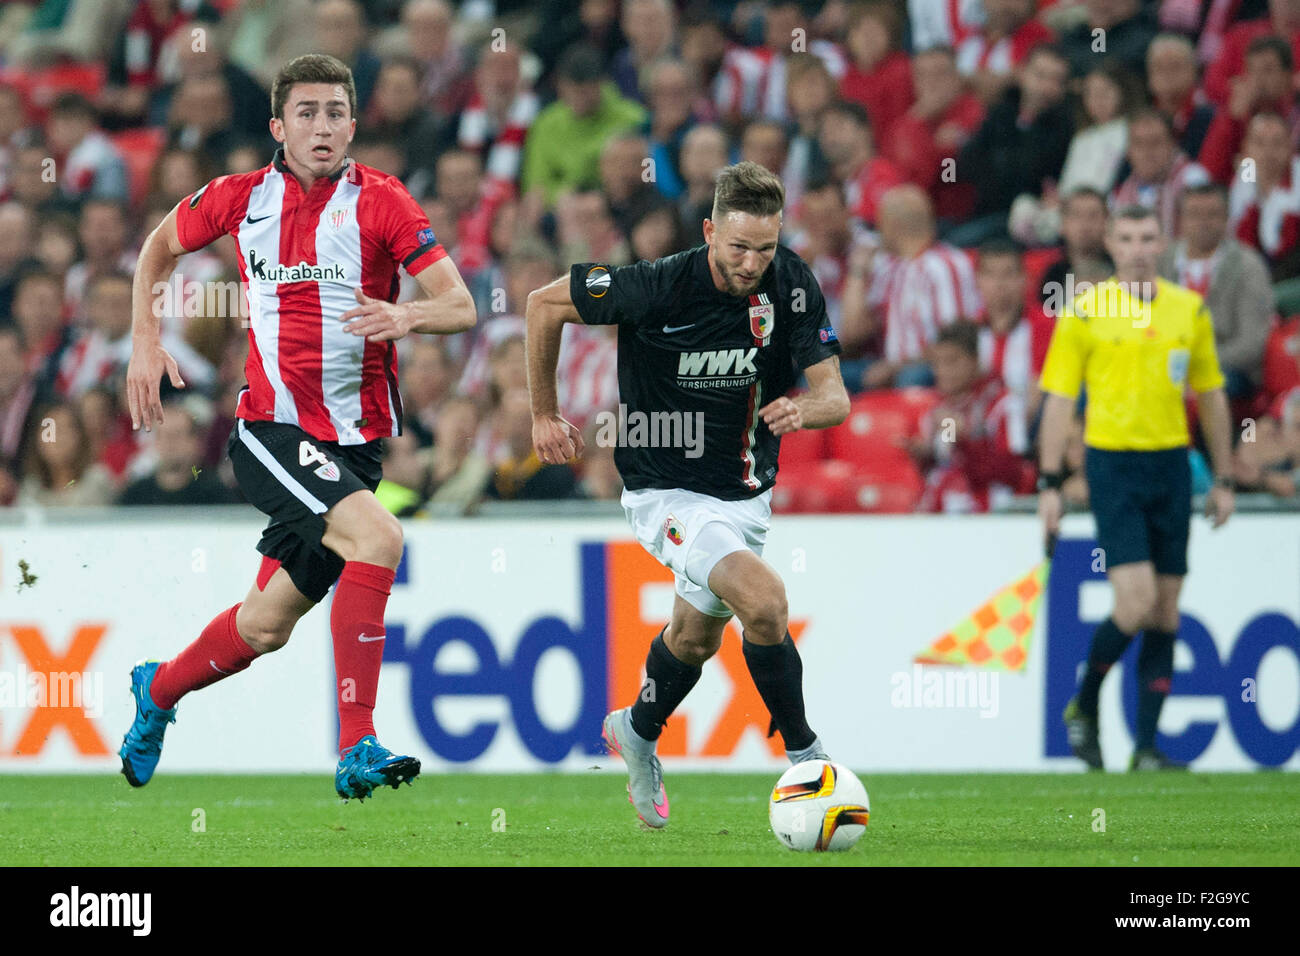 Bilbao, Spain. 17th Sep, 2015. Tim Matavz (R) of Augsburg and Aimeric Laporte of Bilbao vie for the ball during the UEFA Europa League Group L soccer match between Athletic Bilbao and FC Augsburg at Estadio de San Mames in Bilbao, Spain, 17 September 2015. Photo: Juan Flor/dpa/Alamy Live News Stock Photo